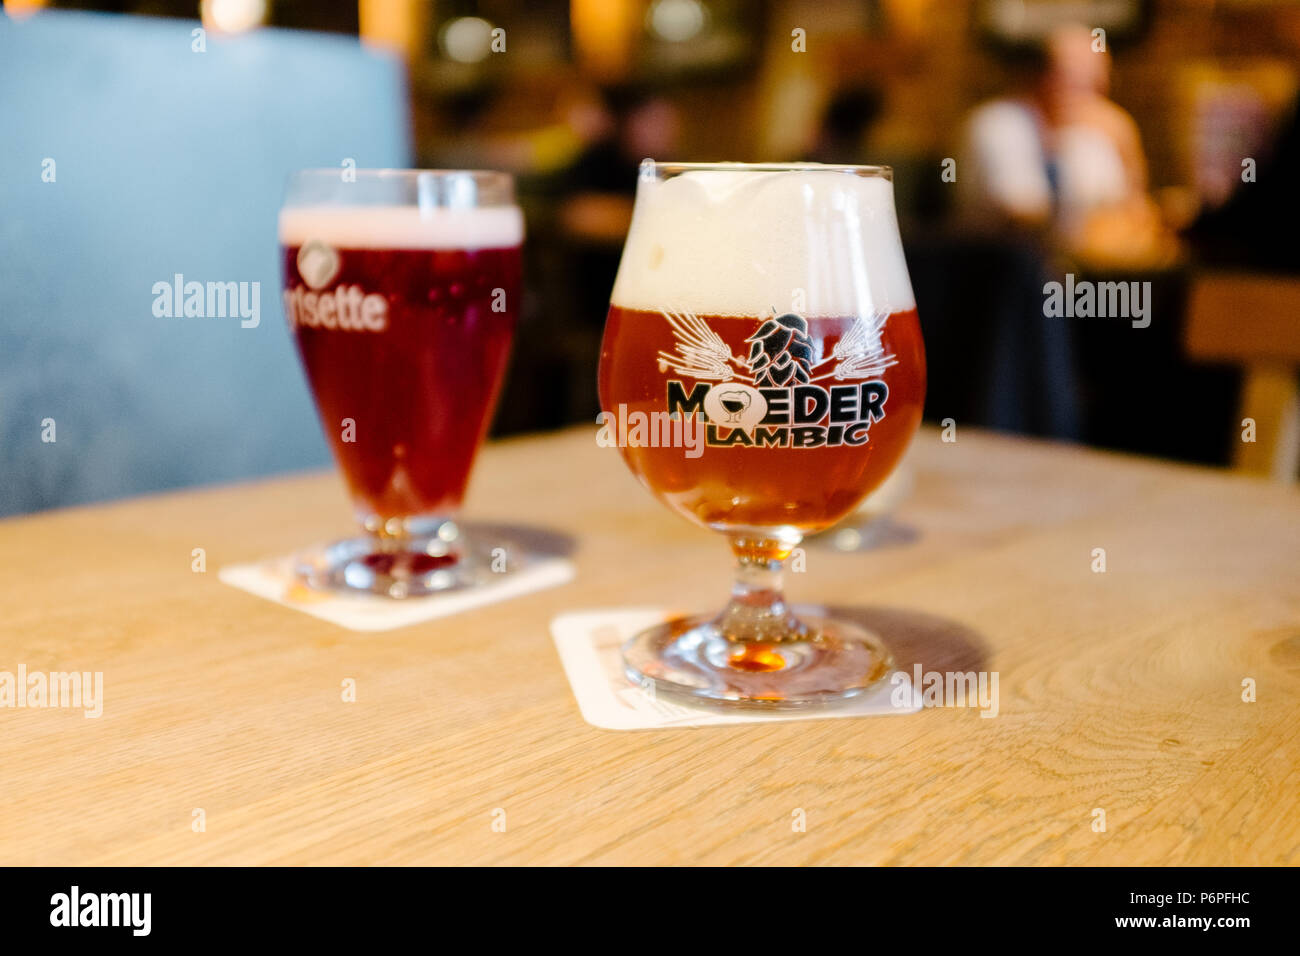 Glasses of beer in the bar Moeder Lambic in central brussels Stock Photo